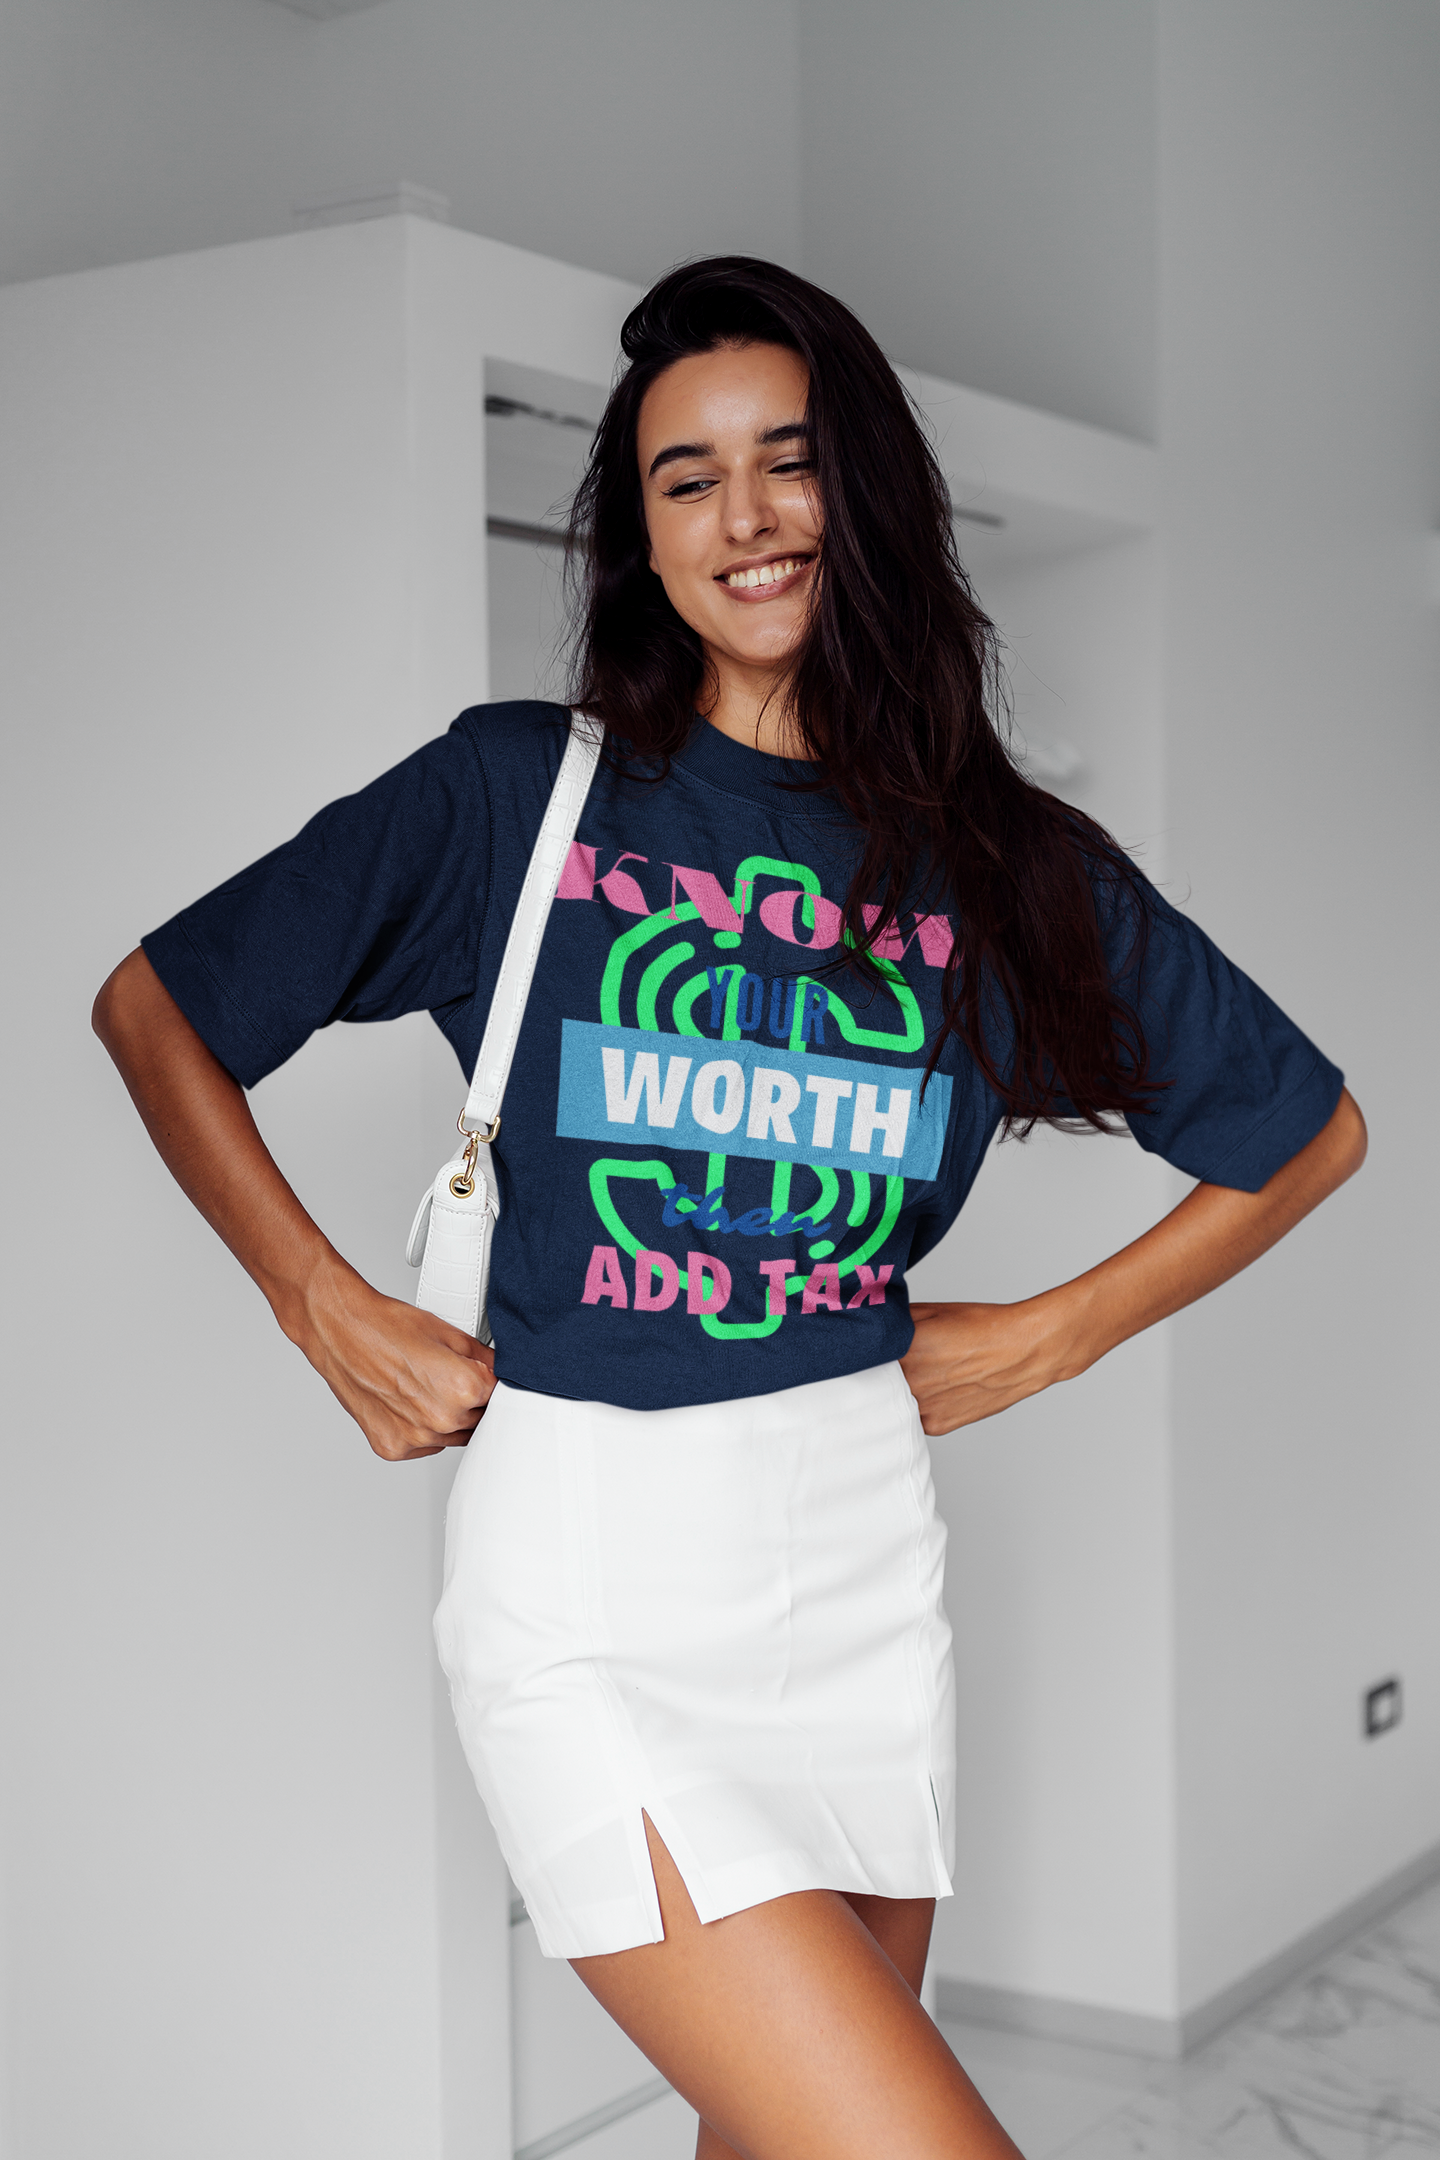 Know Your Worth Short Sleeve Unisex Softstyle Tee